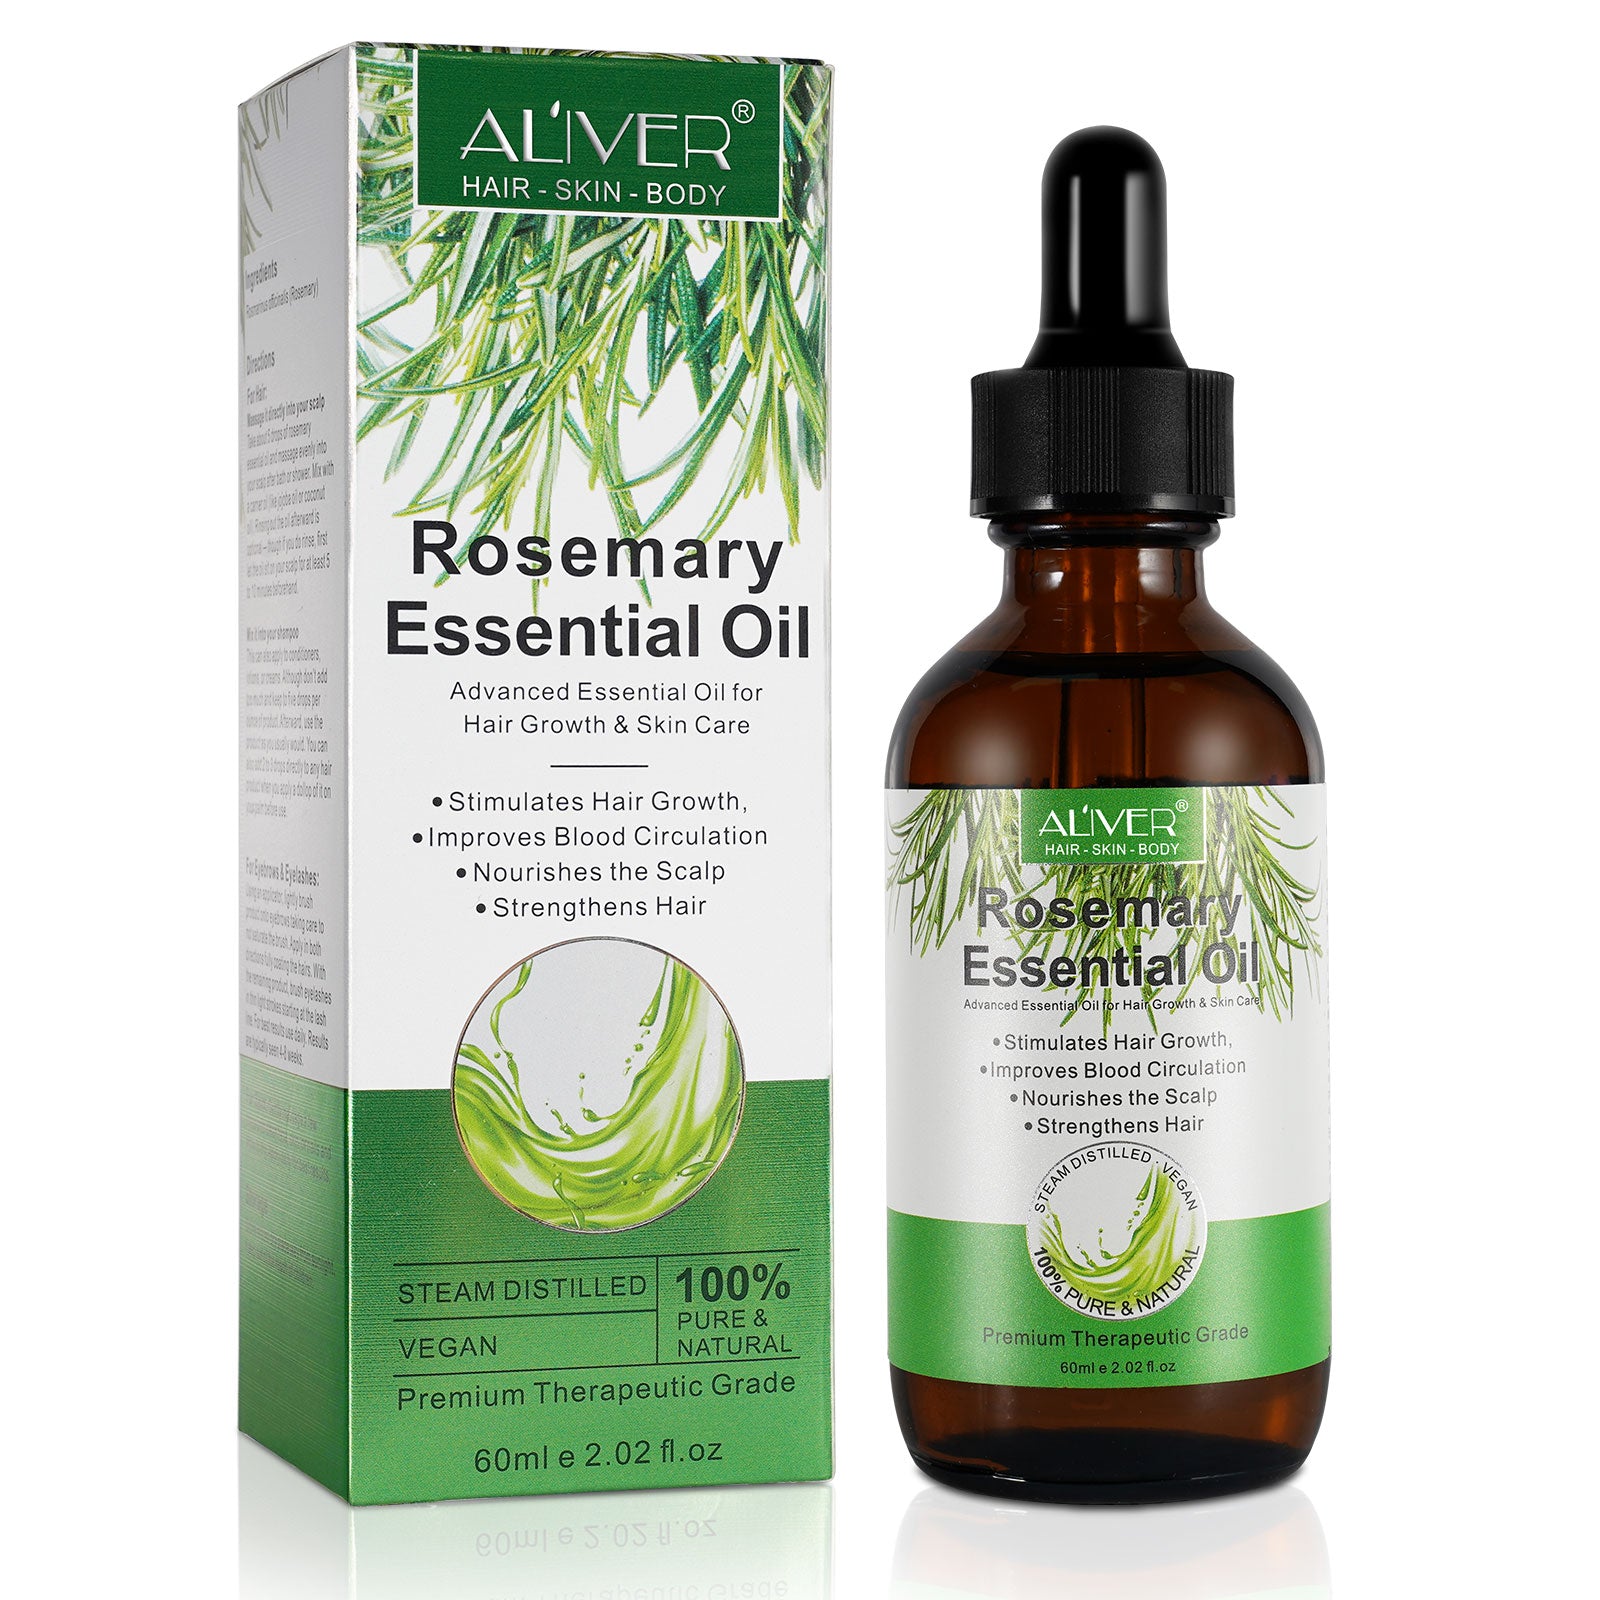 Aliver Rosemary Essential Oil